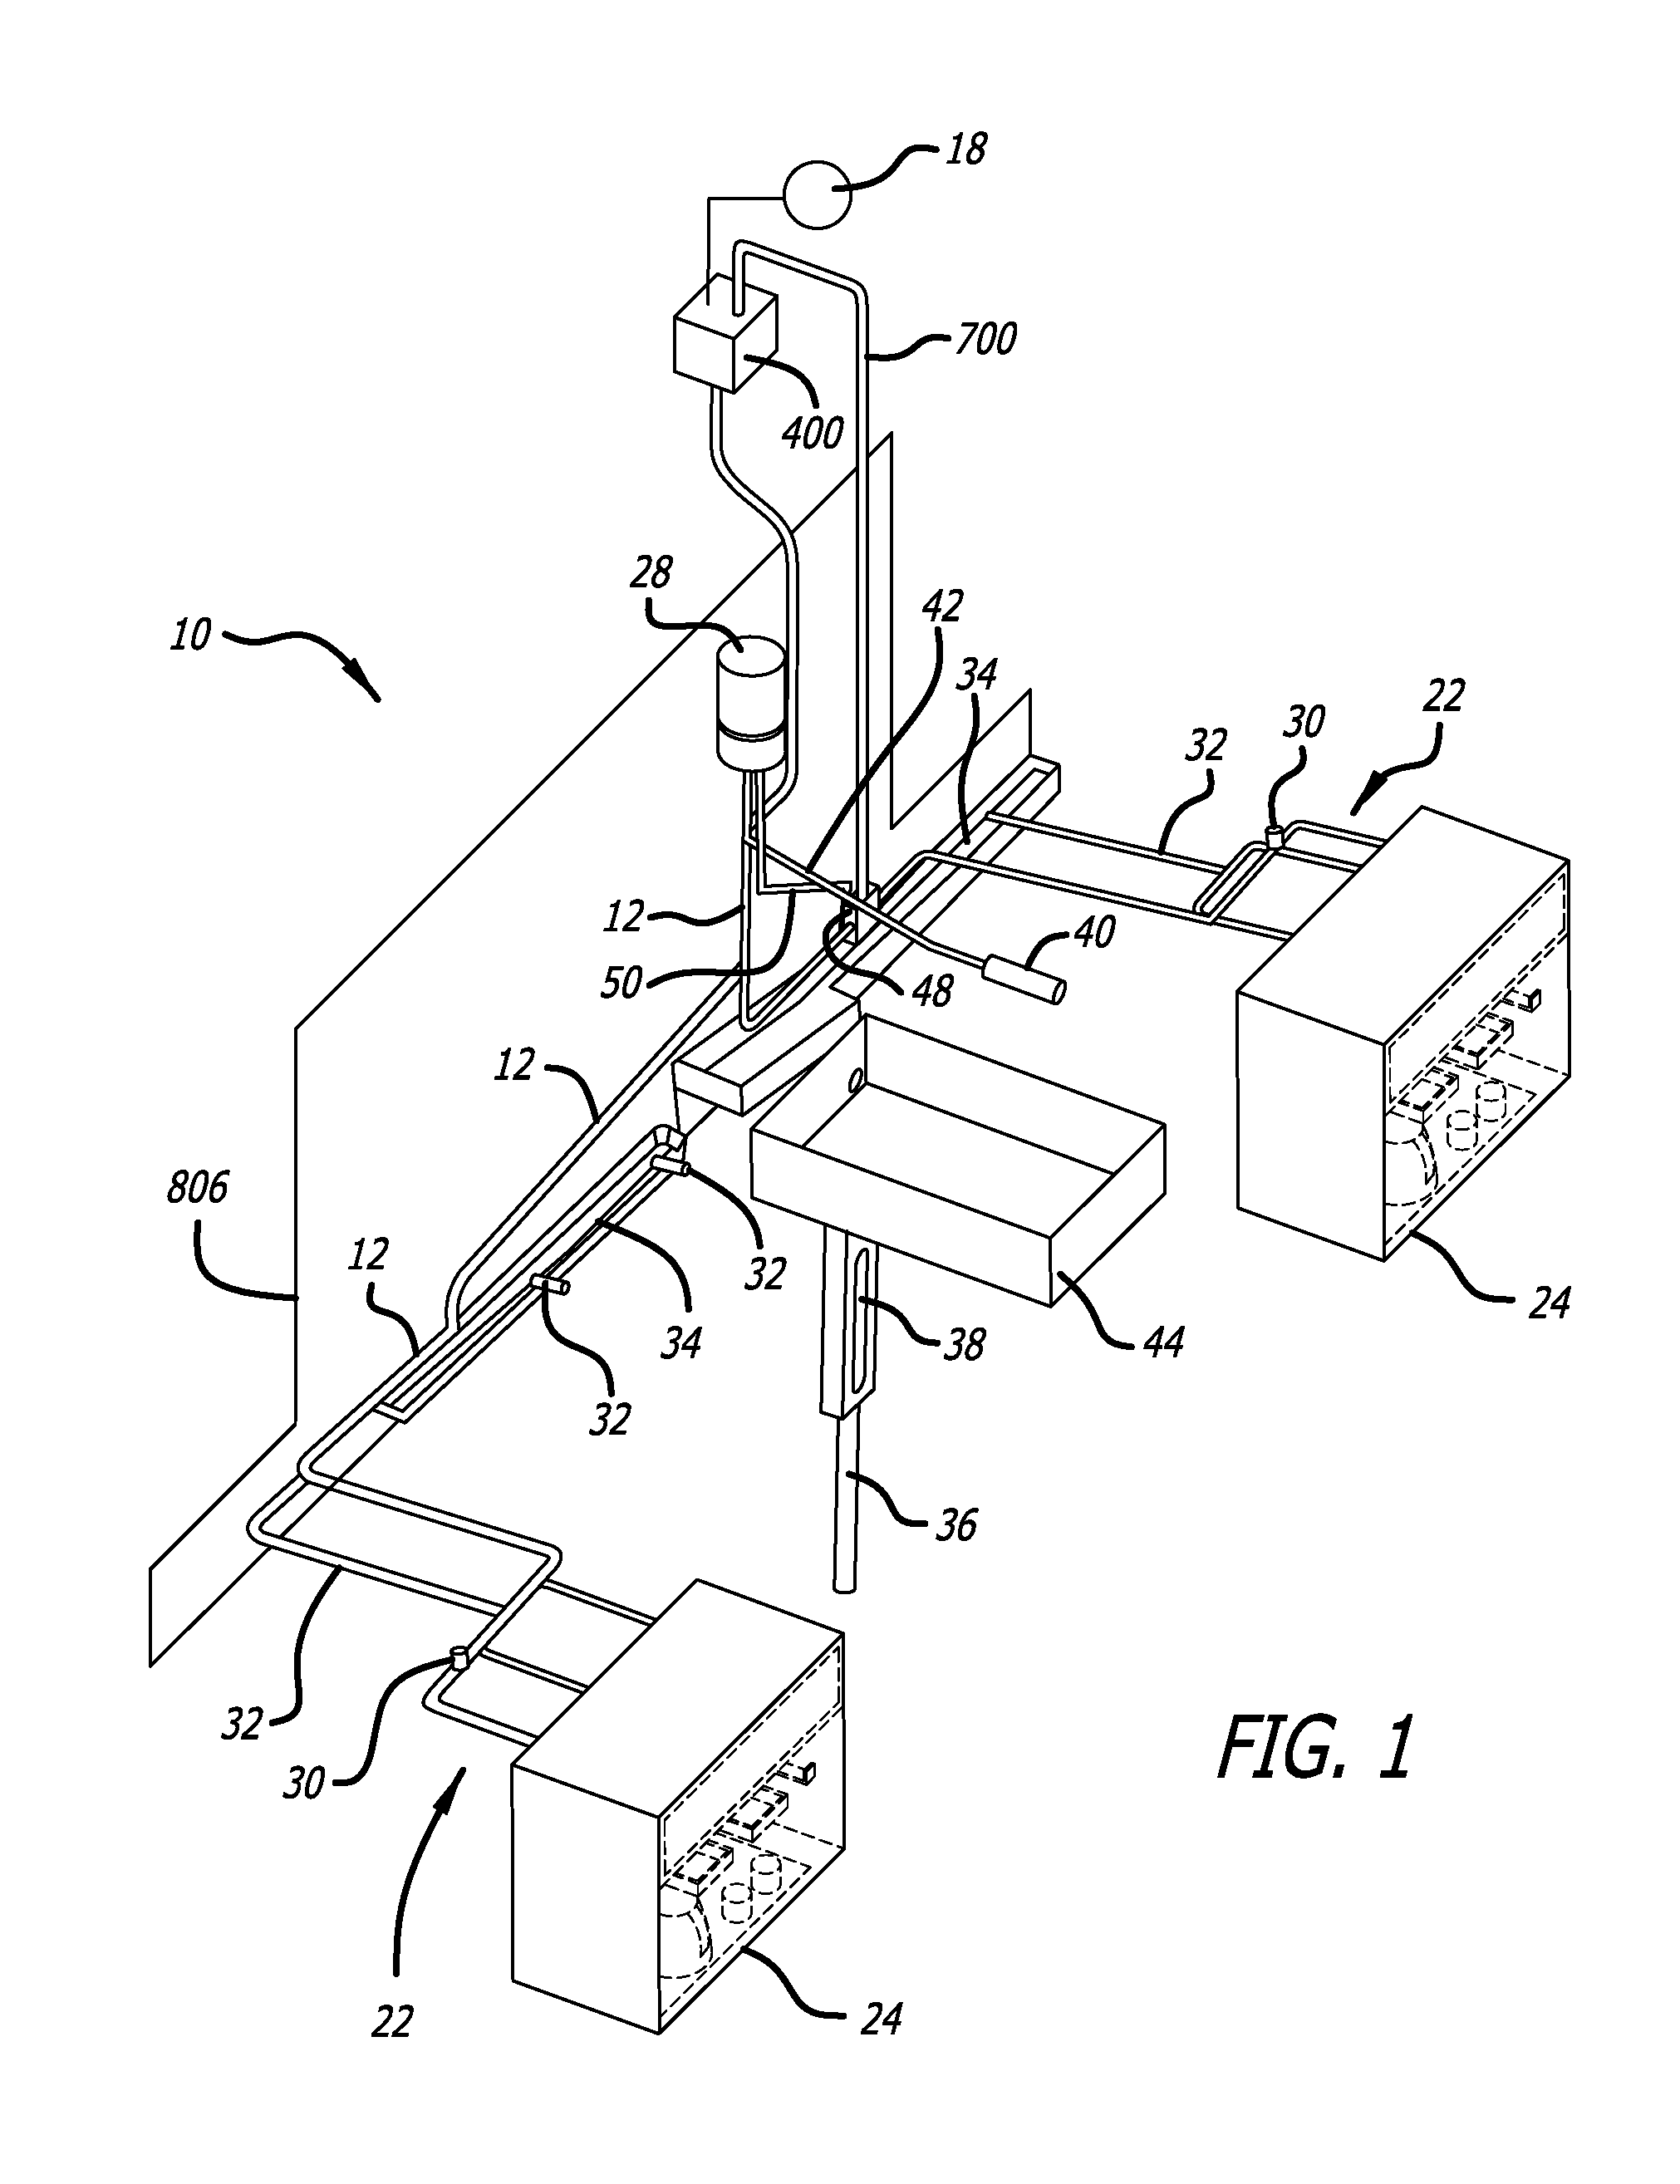 Aircraft galley plumbing system